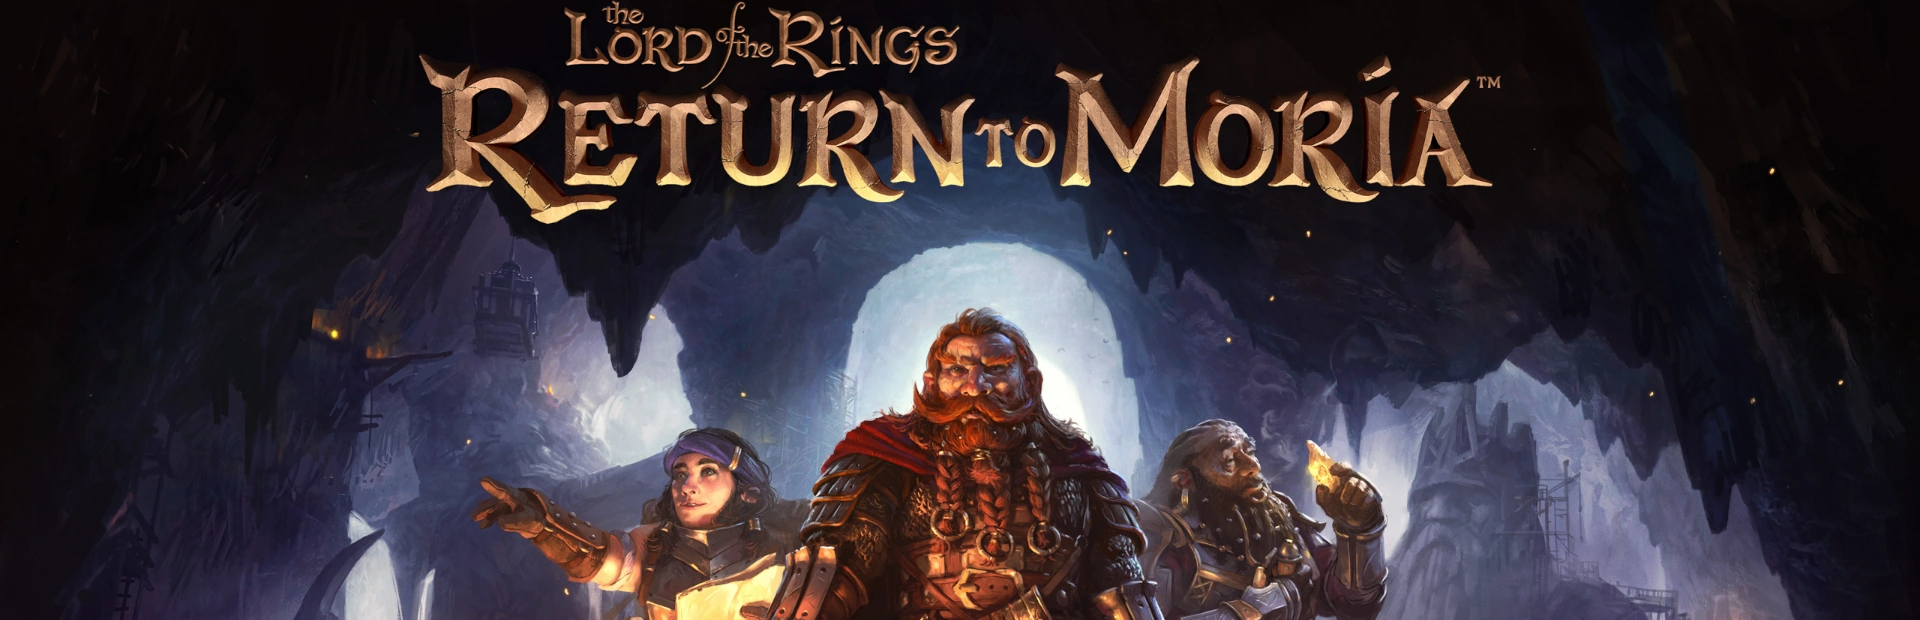 The.Lord .of .the .Rings .Return.to .Moria .banner2